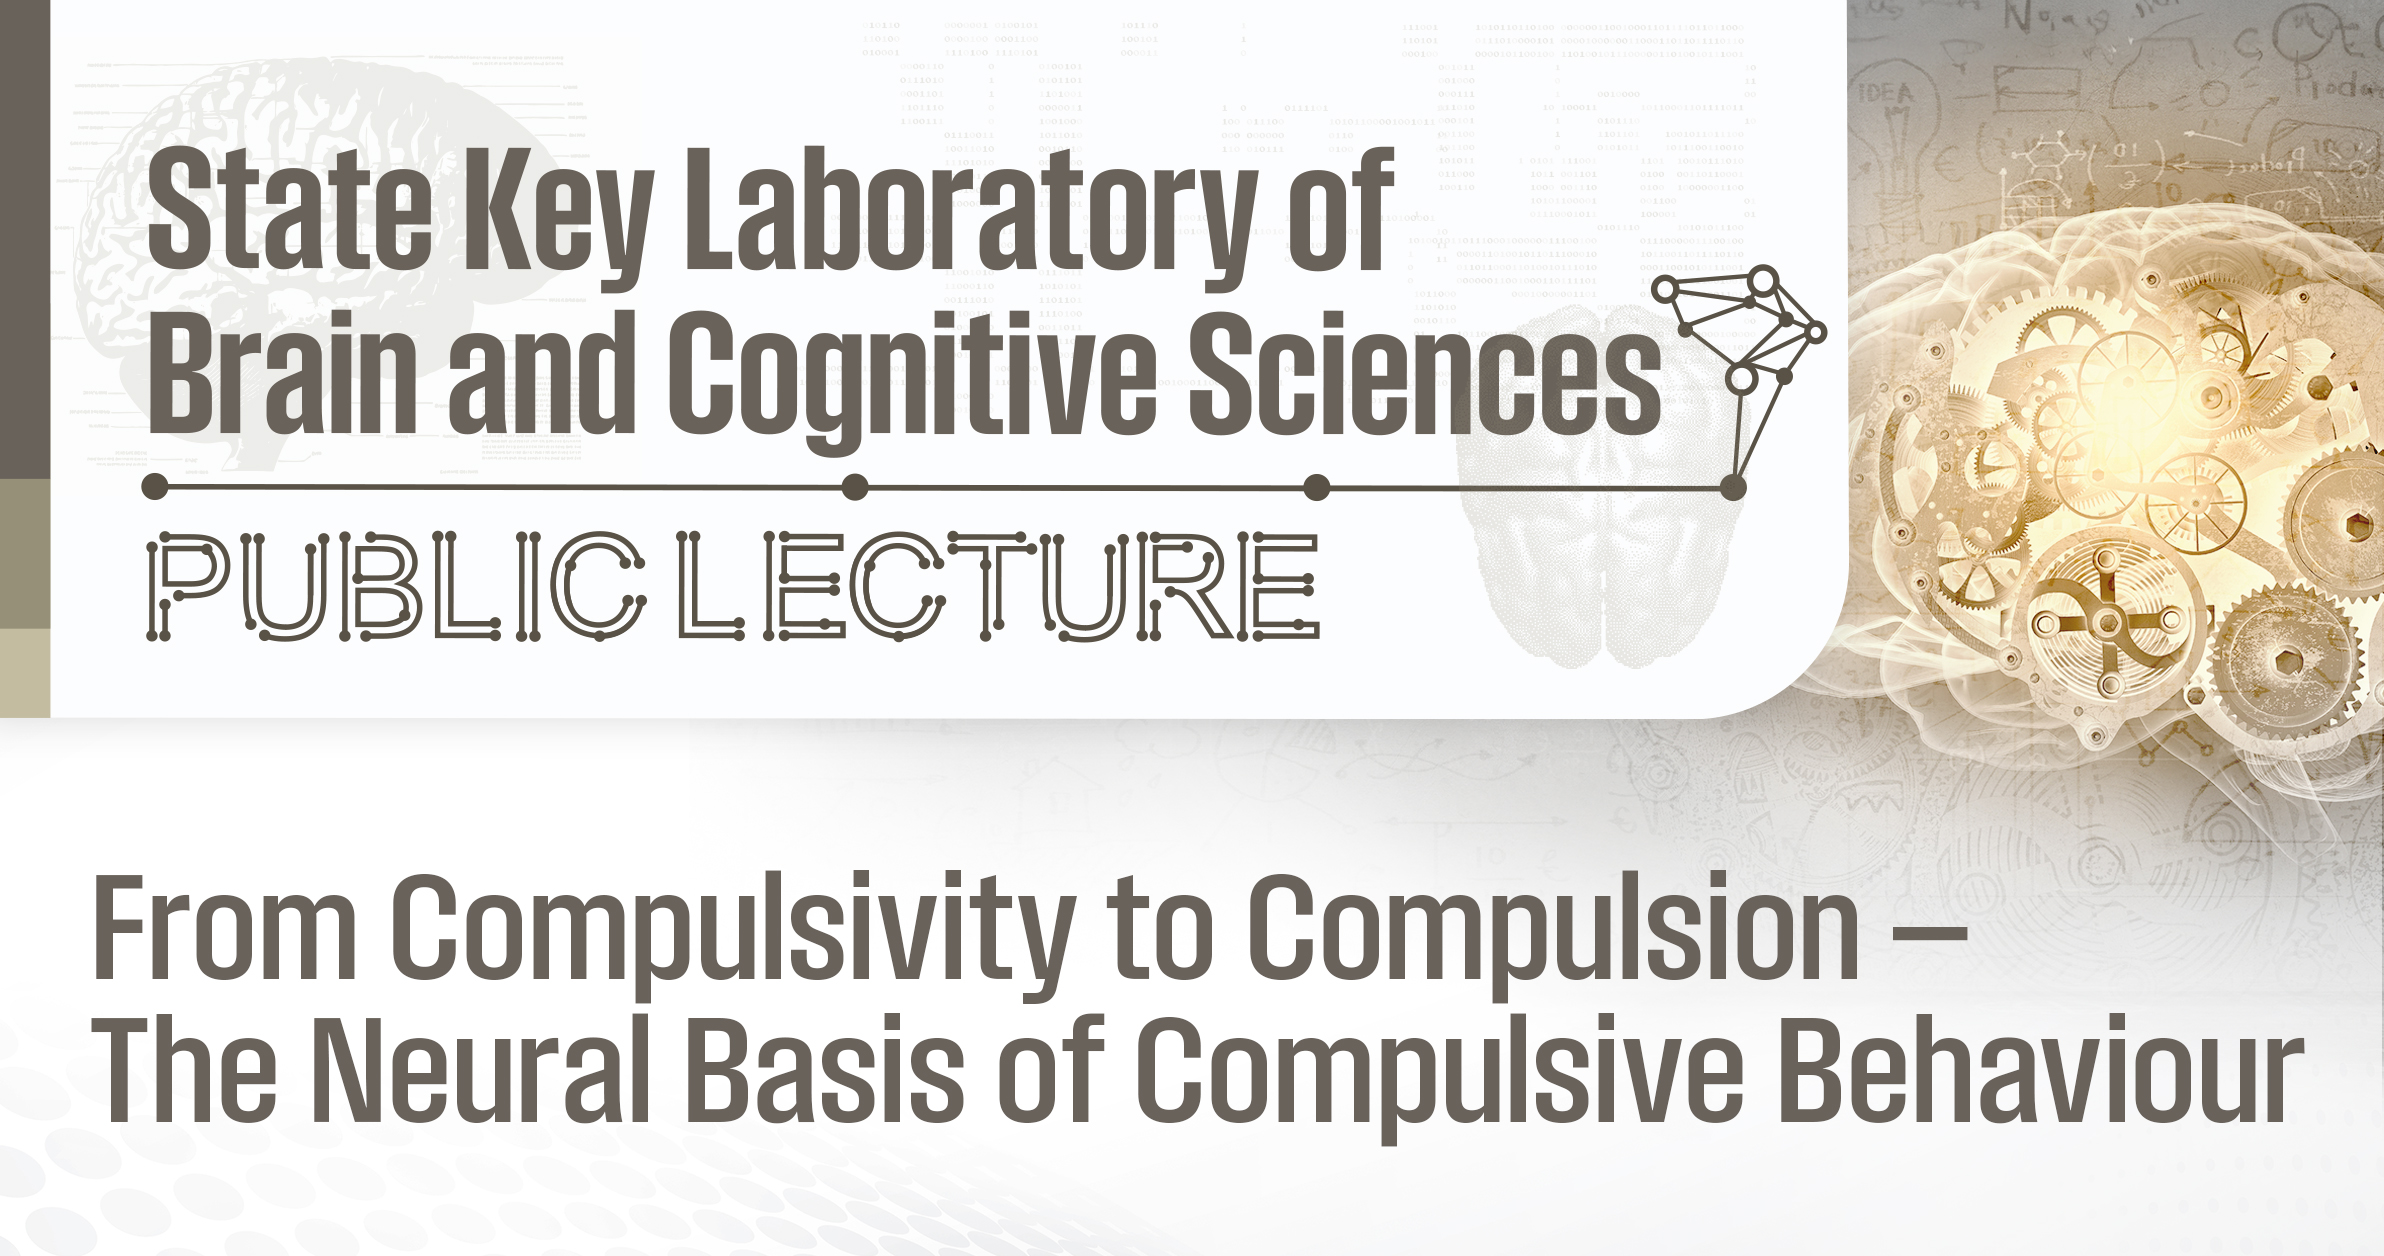 State Key Laboratory of Brain & Cognitive Sciences Public Lecture Series: From Compulsivity to Compulsion — The Neural Basis of Compulsive Behaviour